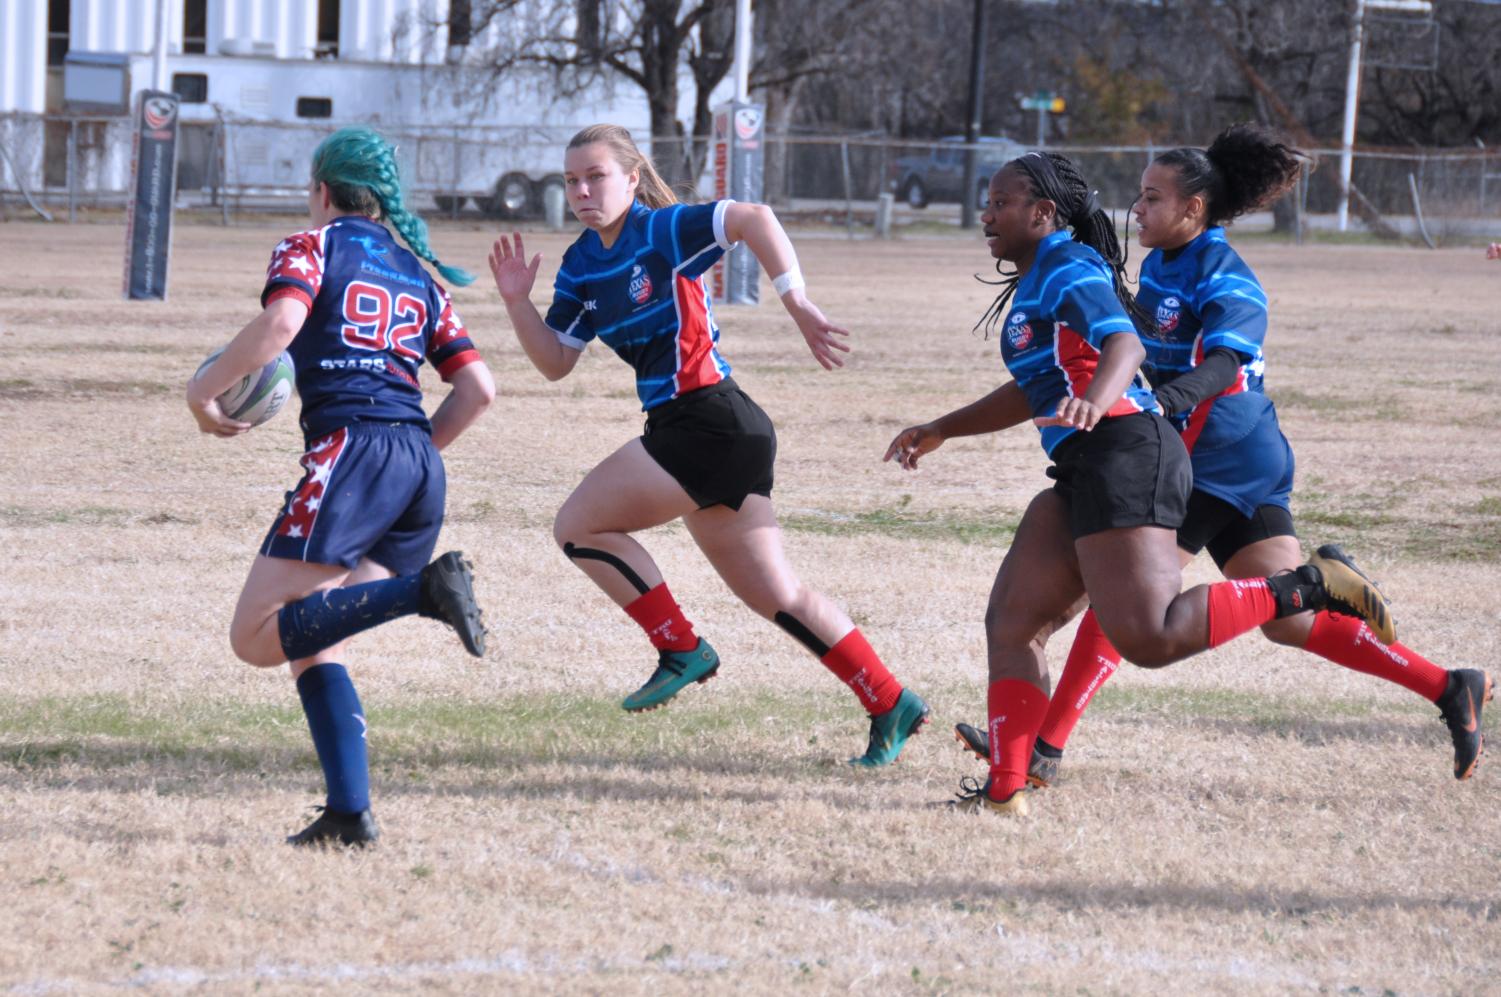 Lindale alumna Lynsey McKinney heads upfield with her All-Star teammates. She also recently attended a rugby camp in California.